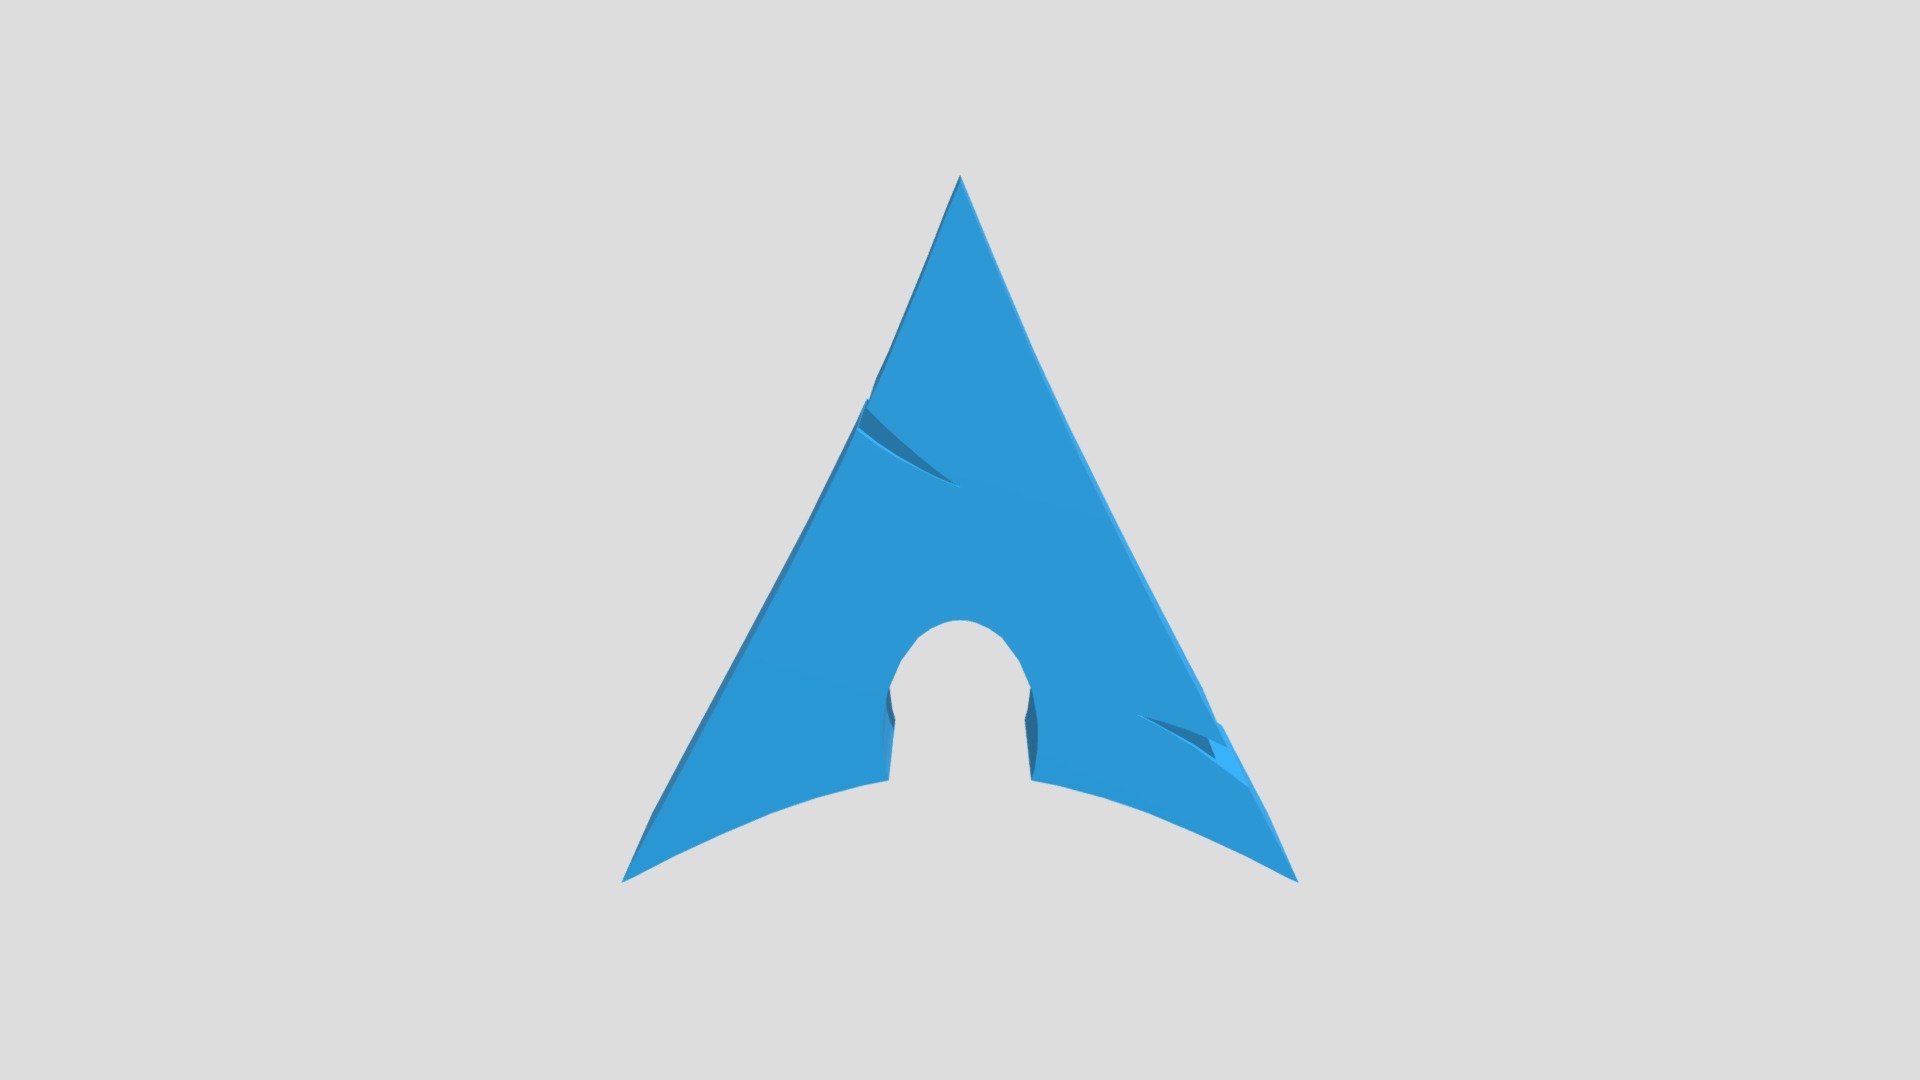 Arch Linux Logo Download Free 3d Model By Extome 8fbac89 Sketchfab